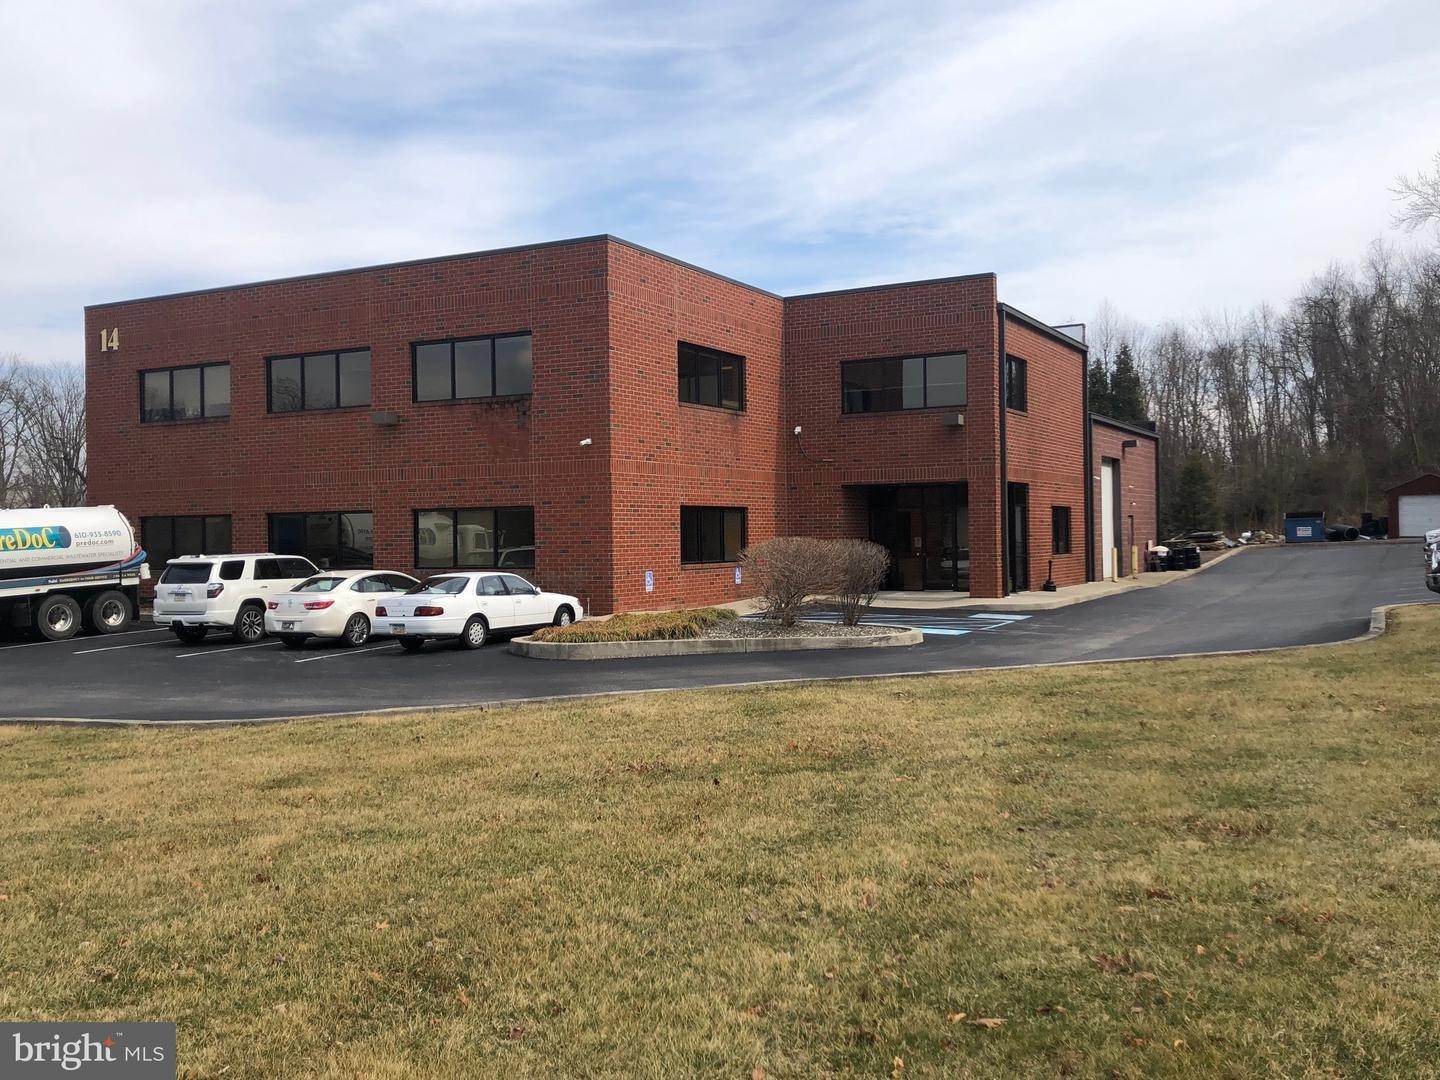 Offices for Sale at 14 CHRISEVYN Lane Phoenixville, Pennsylvania 19460 United States